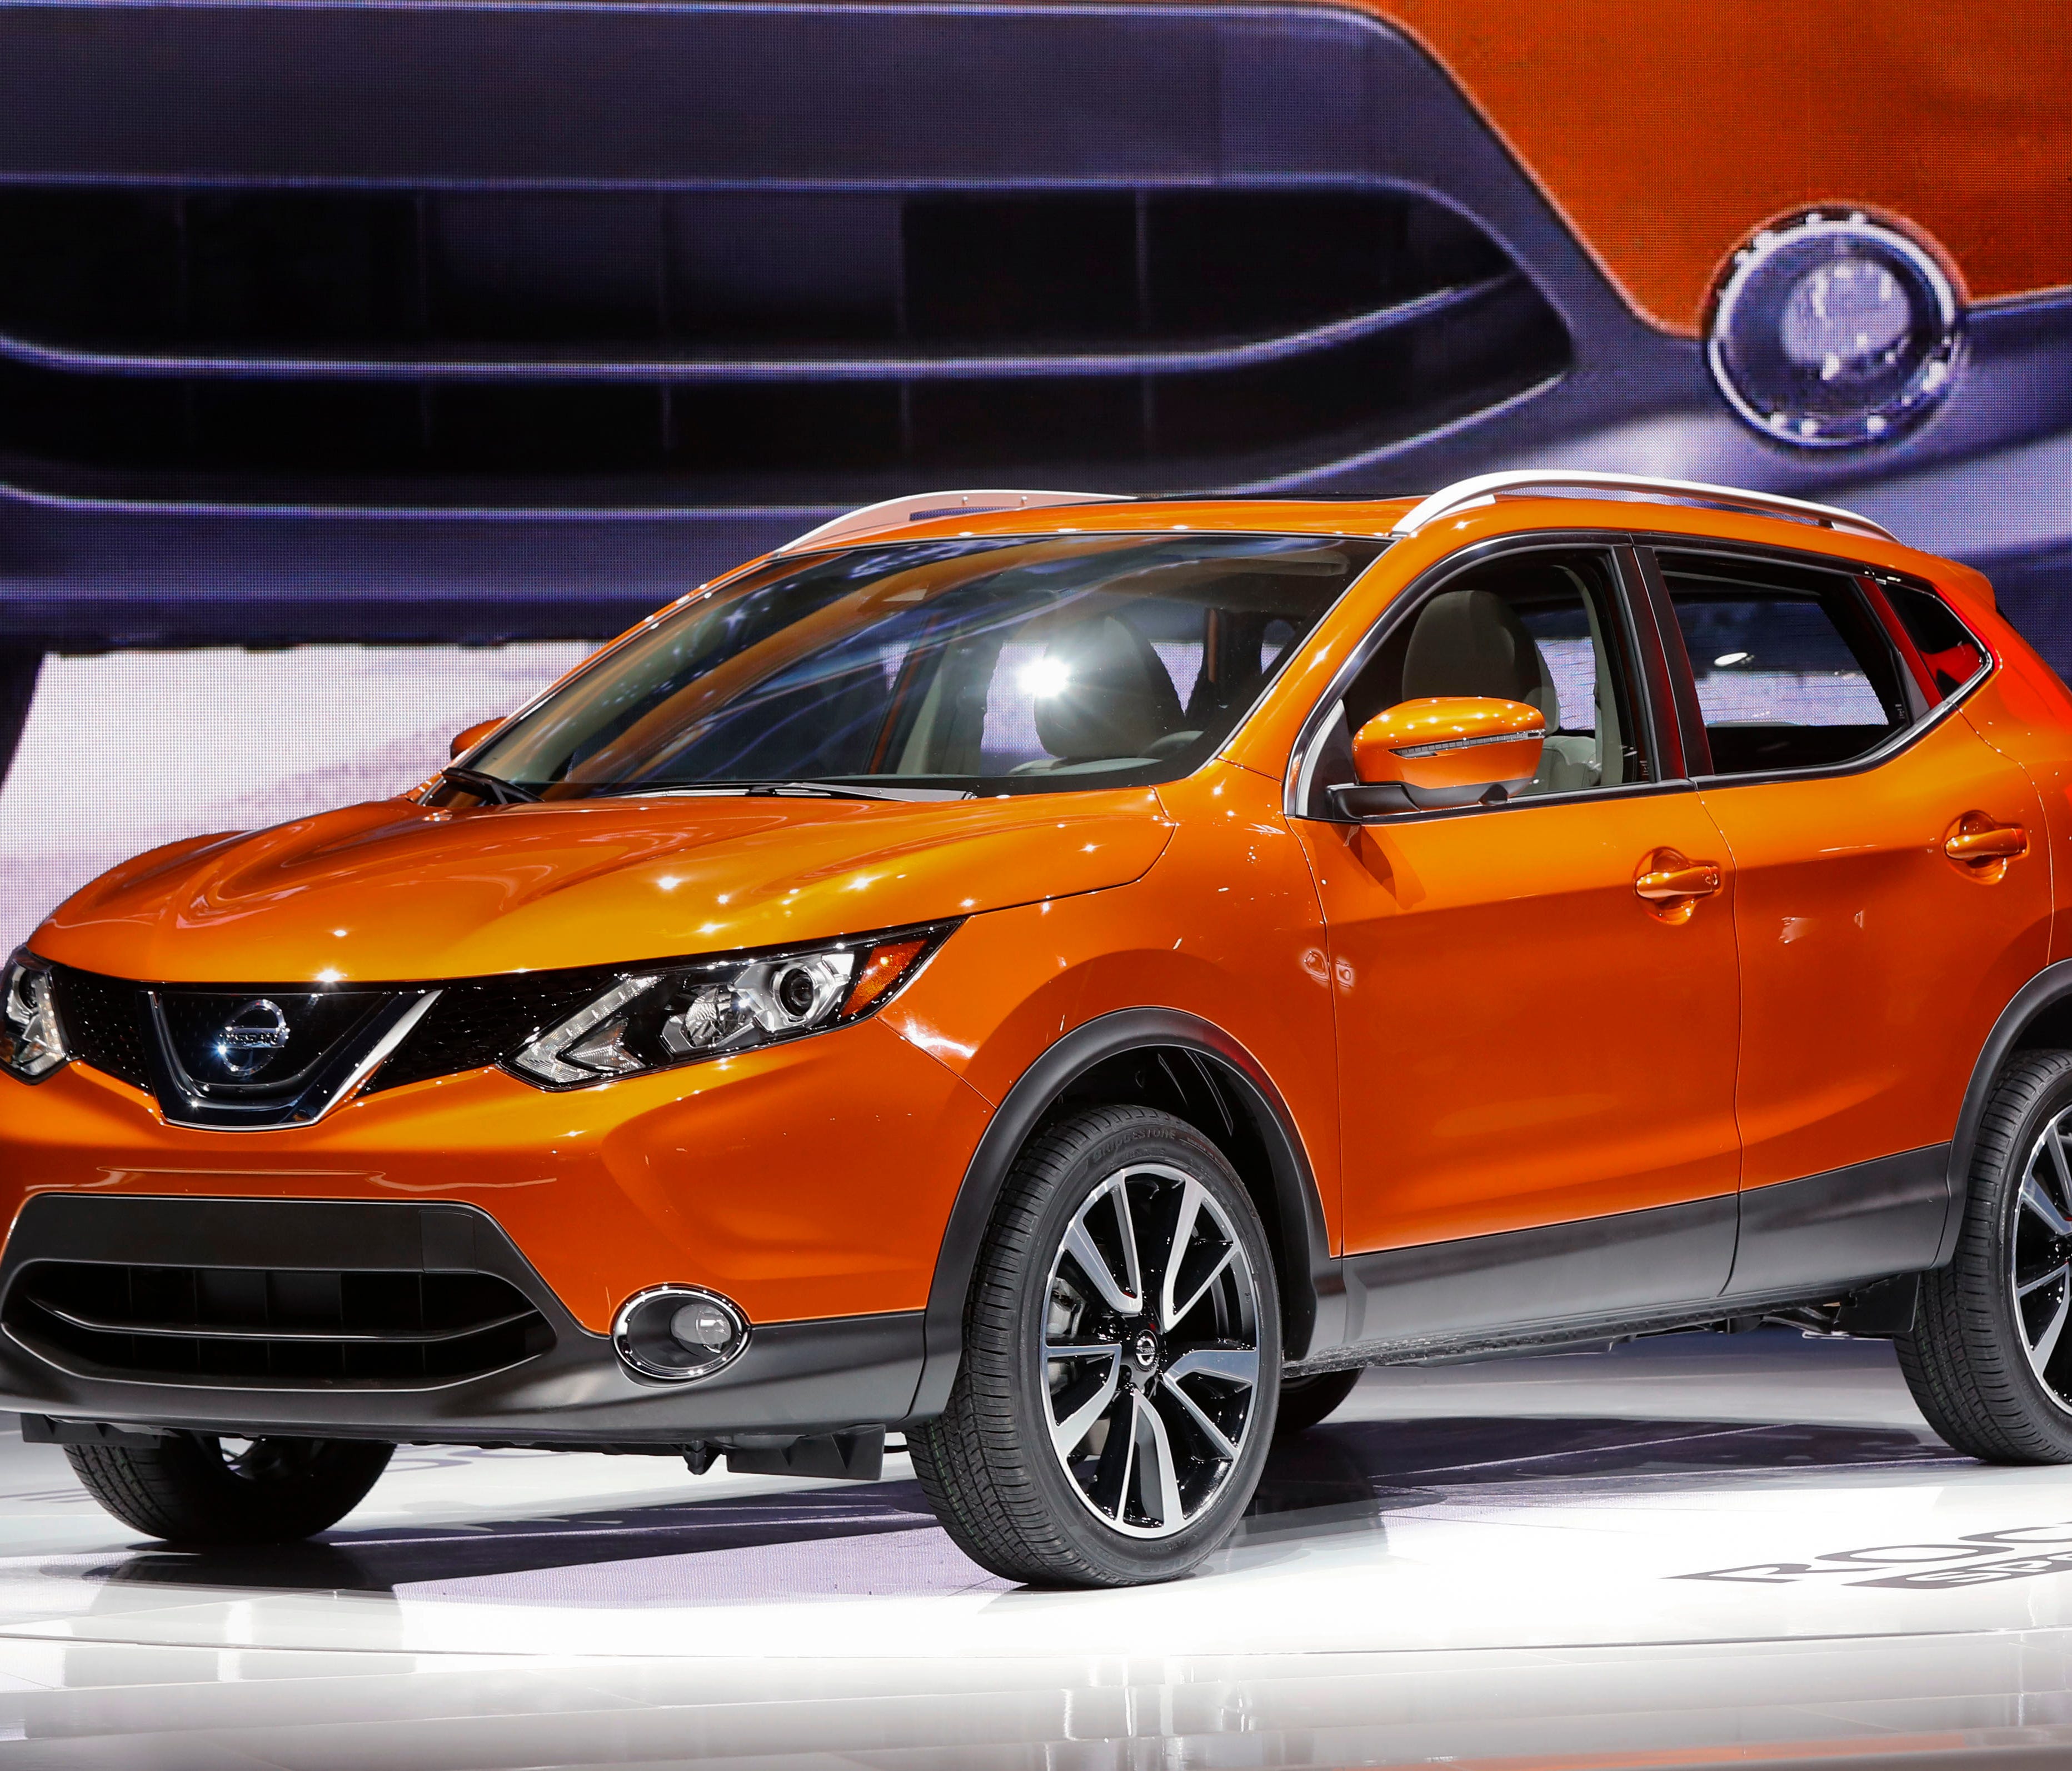 The 2017 Nissan Rogue Sport is on display at the North American International Auto Show in Detroit. The alliance of Japanese automaker Nissan Motor Co. and Renault SA of France says it led in global vehicle sales for the first half of this year, the 